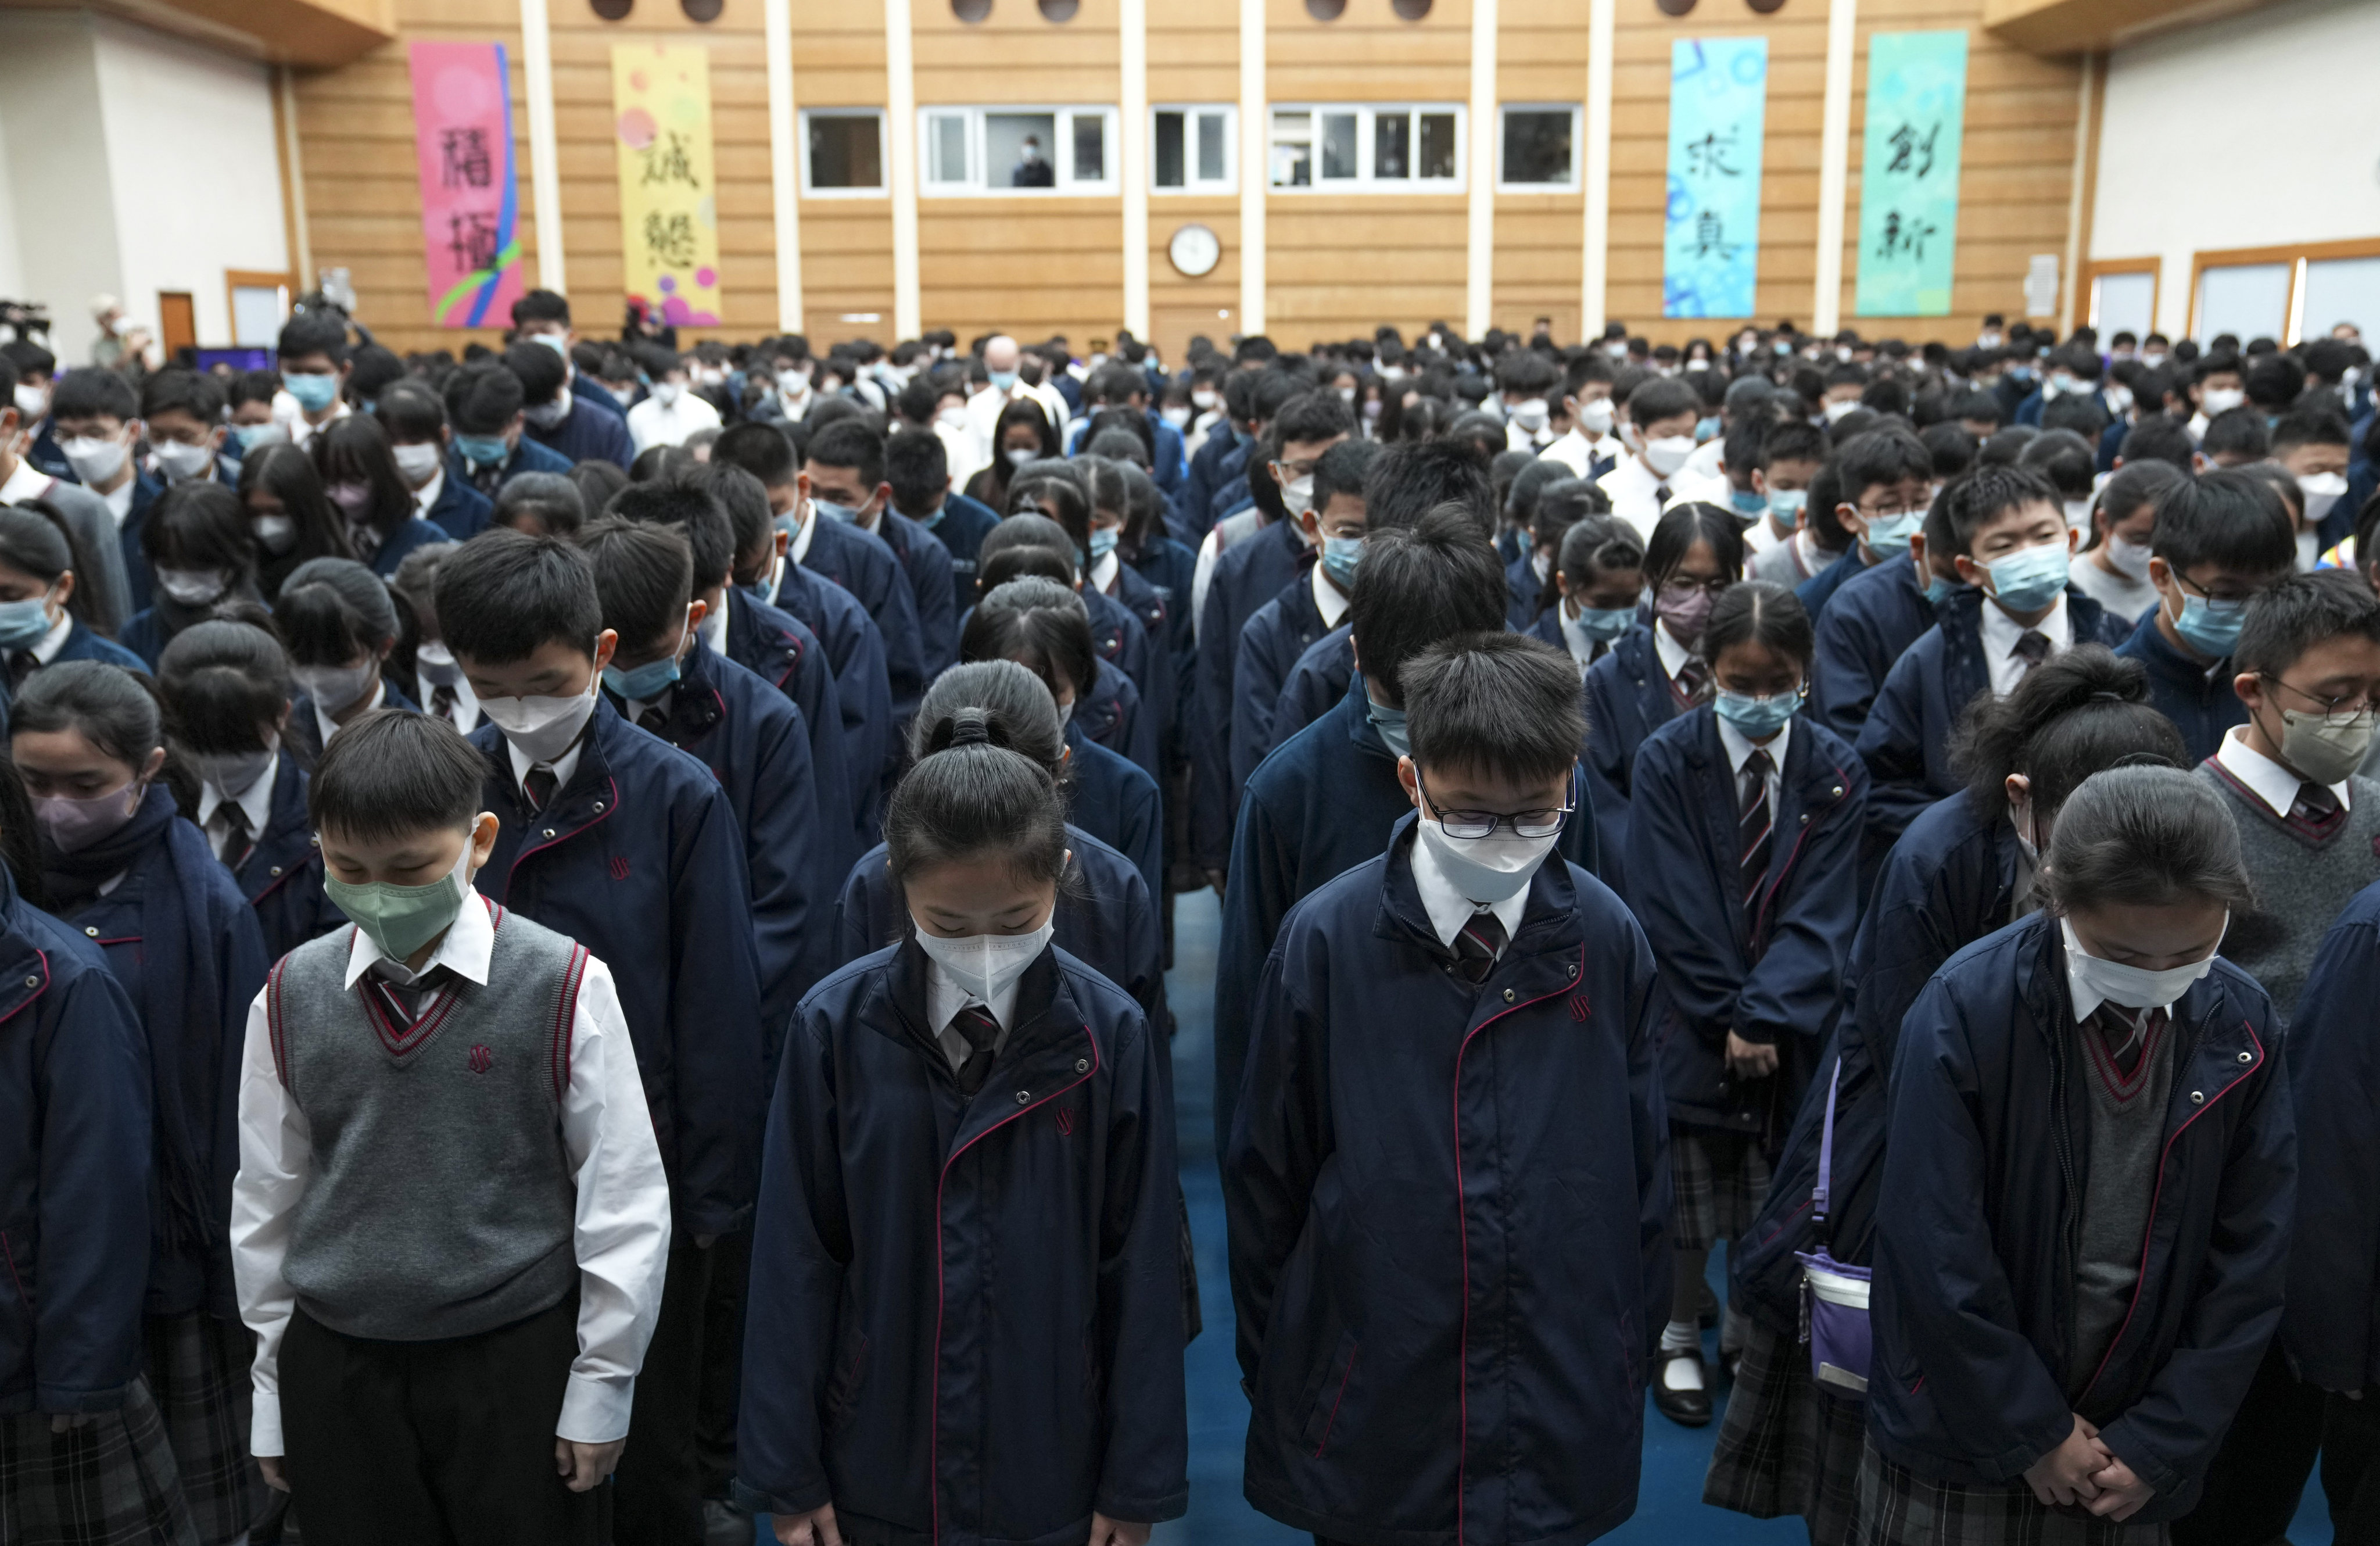 Scientia Secondary School students observing three minutes of silence before the live broadcast of the funeral service. Photo: Sam Tsang